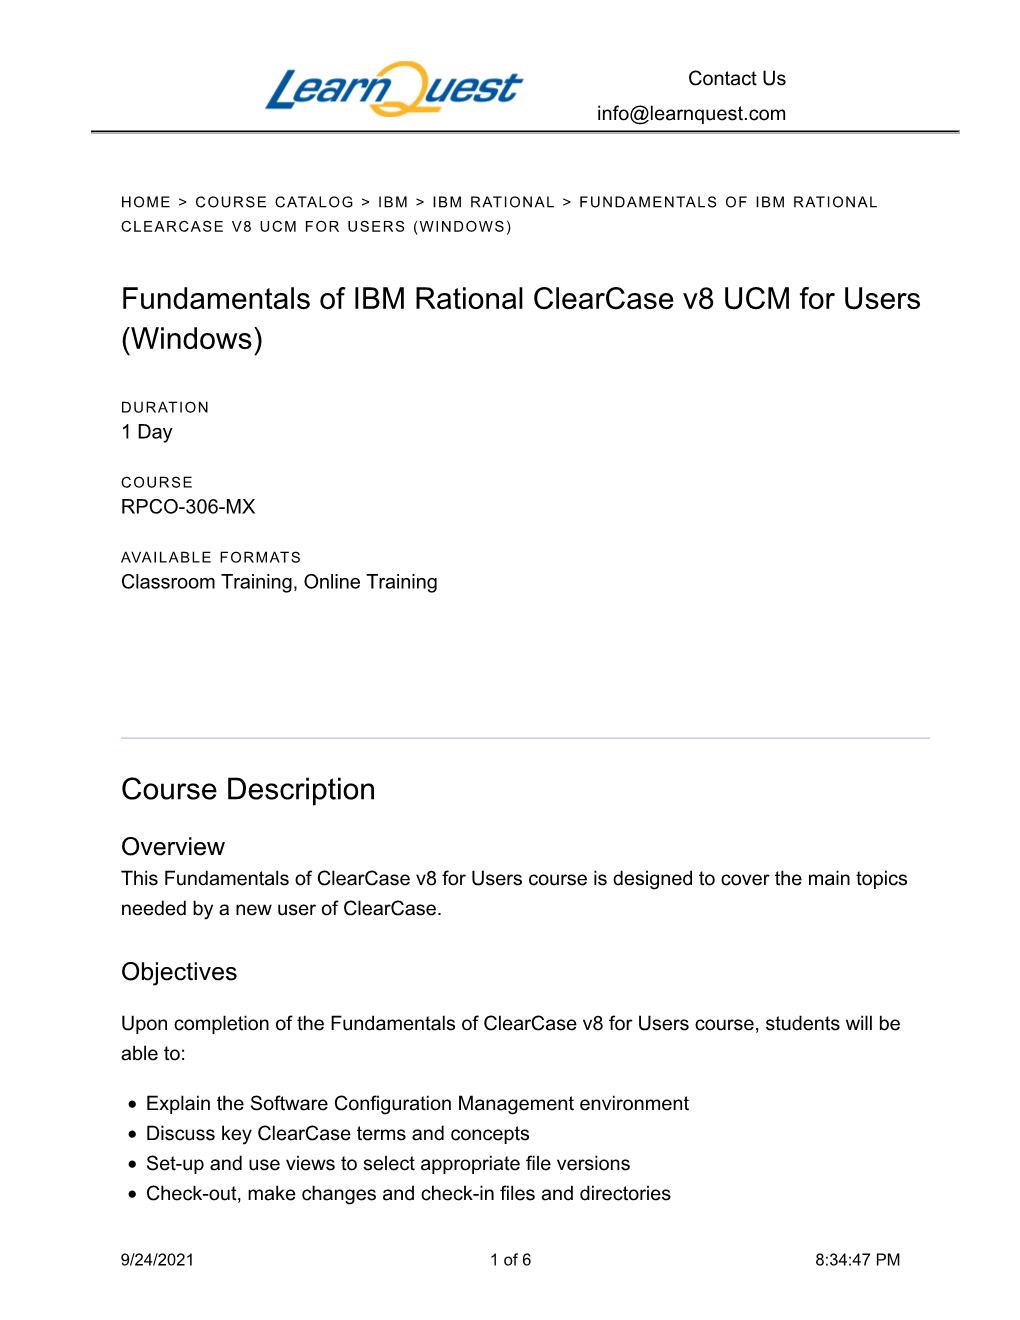 Fundamentals of Ibm Rational Clearcase V8 Ucm for Users (Windows)